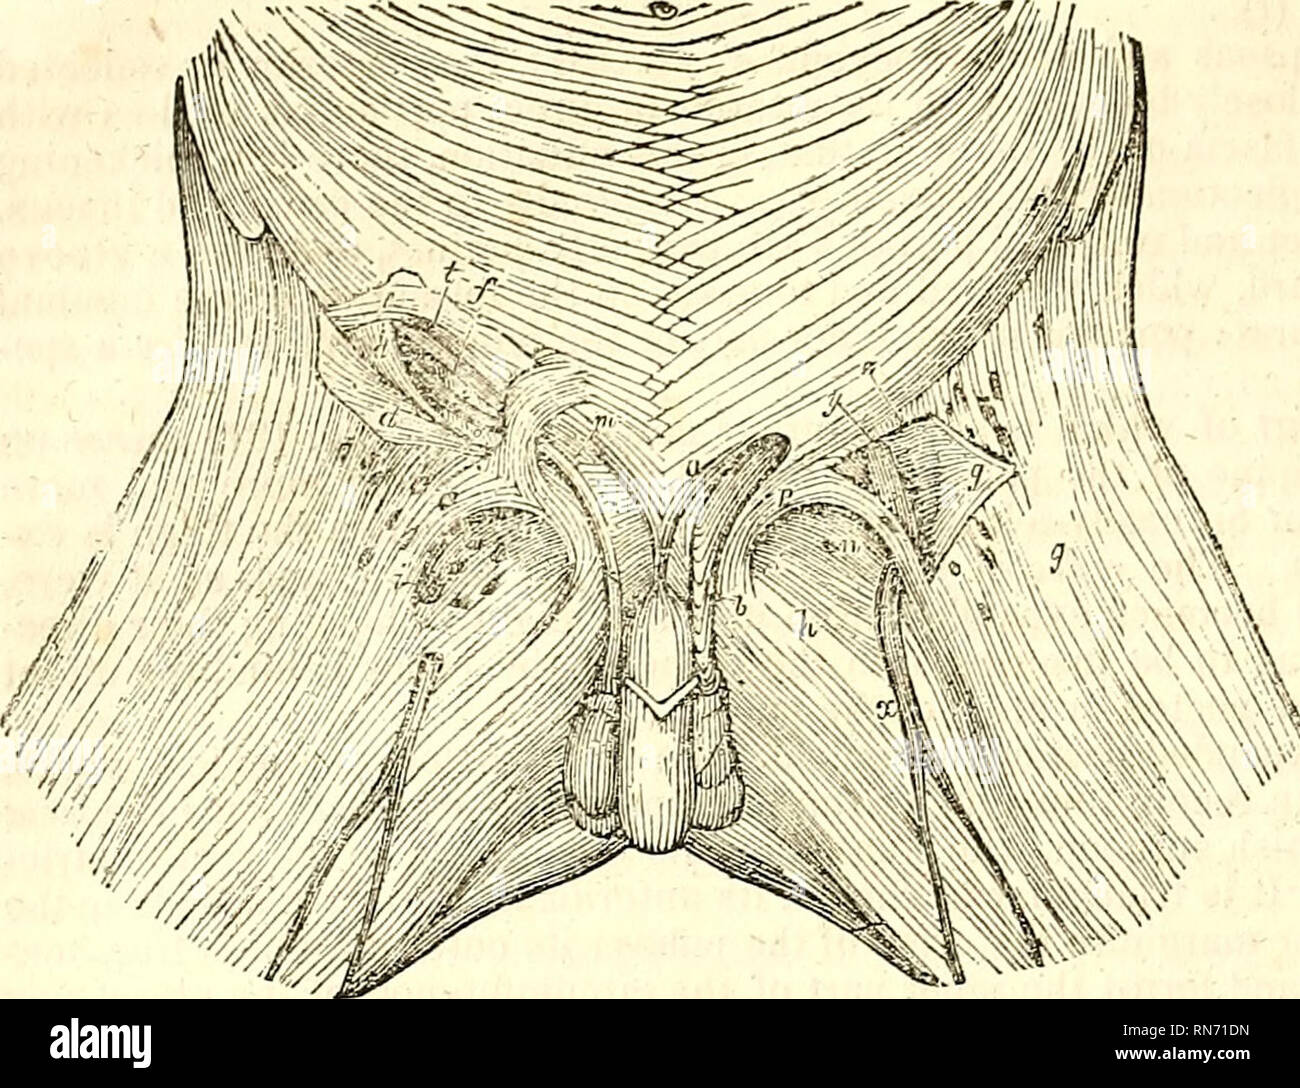 . The anatomy of the human body. Human anatomy; Anatomy. 304 APONEUROLOGY. Fie. 137. tween tlie spine and symphysis pubis. Its apex is not always well defined, and is generally truncated by fibres which pass at right angles to its pillars. From the up- per part of the margin of the ring a tendi- nous prolongation is given off, which ac- companies the sper- matic cord in the male, and the round ligament in the fe- male. Of the pillars, one is external or inferior, the other internal or superior. The external pillar (p) is attached, not to the spine of the OS pubis, but into the fore part of the Stock Photo